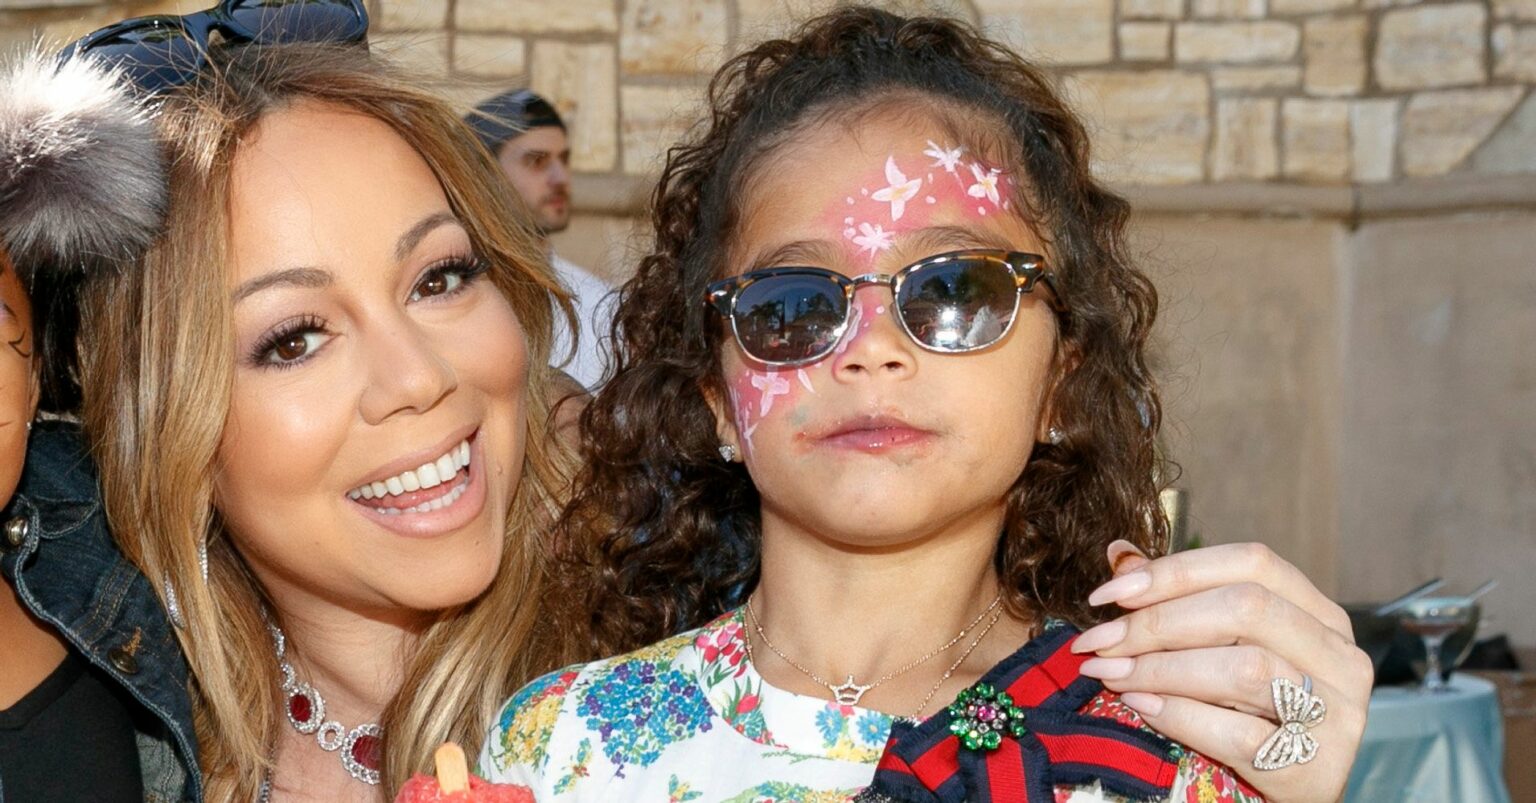 Who is Mariah Carey's daughter? (Celebrity Exclusive)